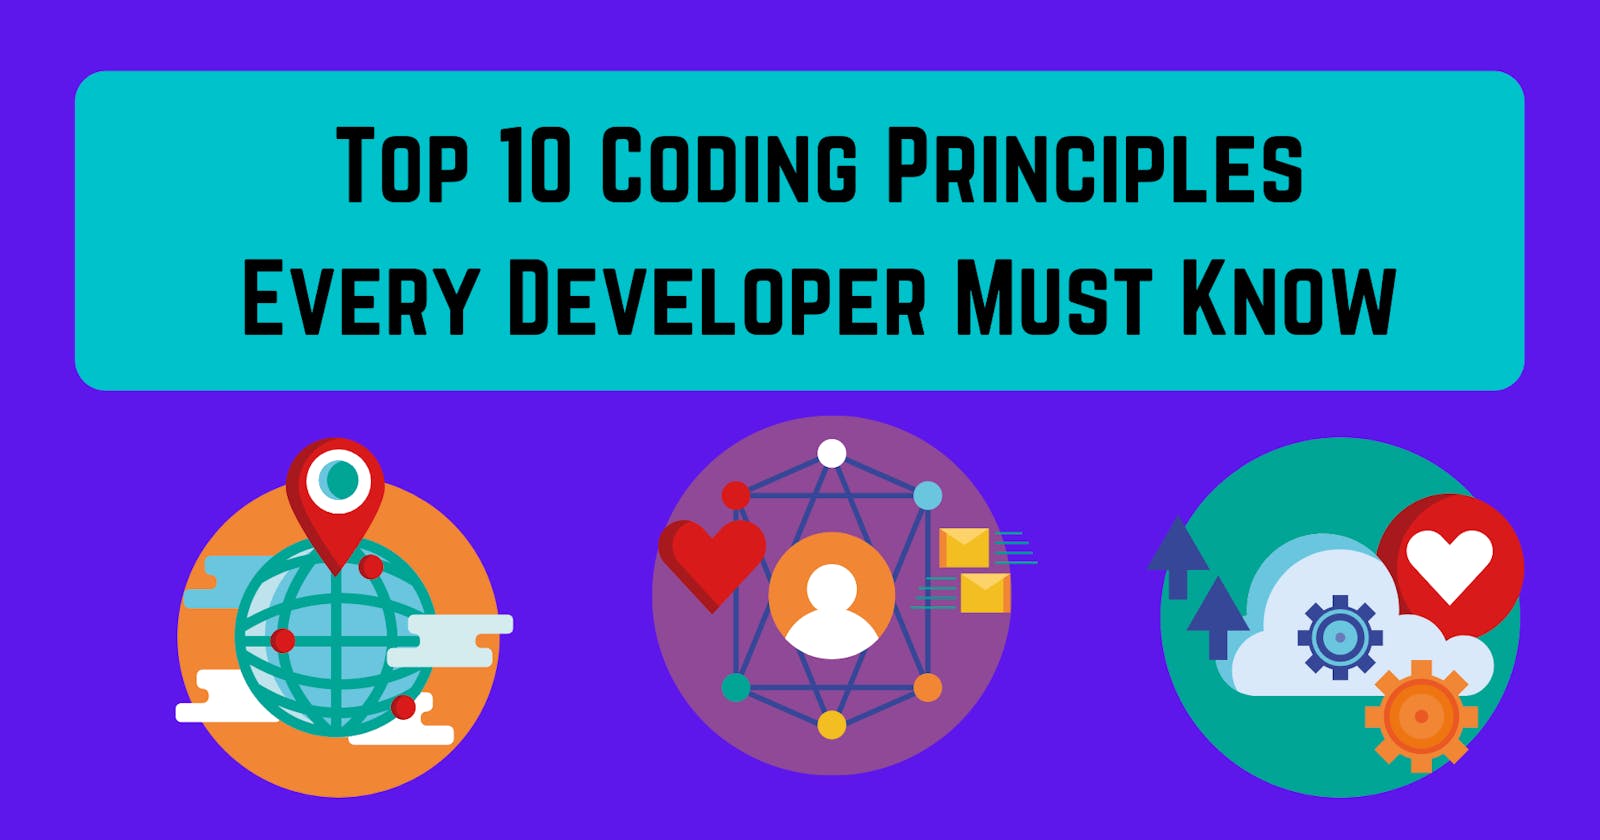 Top 10 Coding Principles Every Developer Must Know